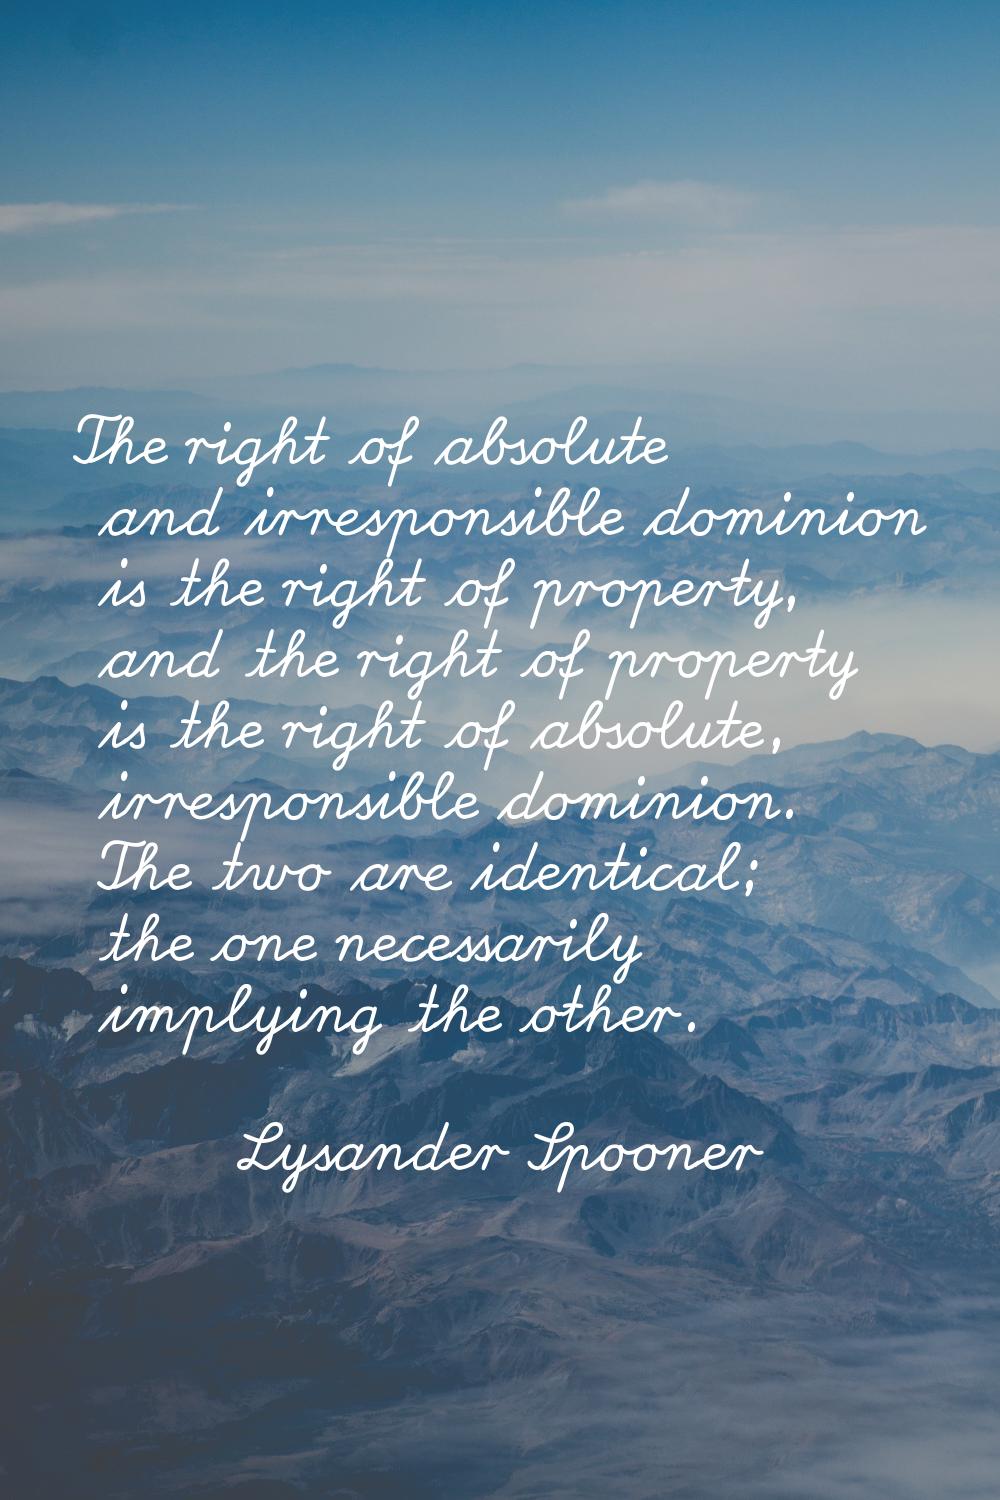 The right of absolute and irresponsible dominion is the right of property, and the right of propert